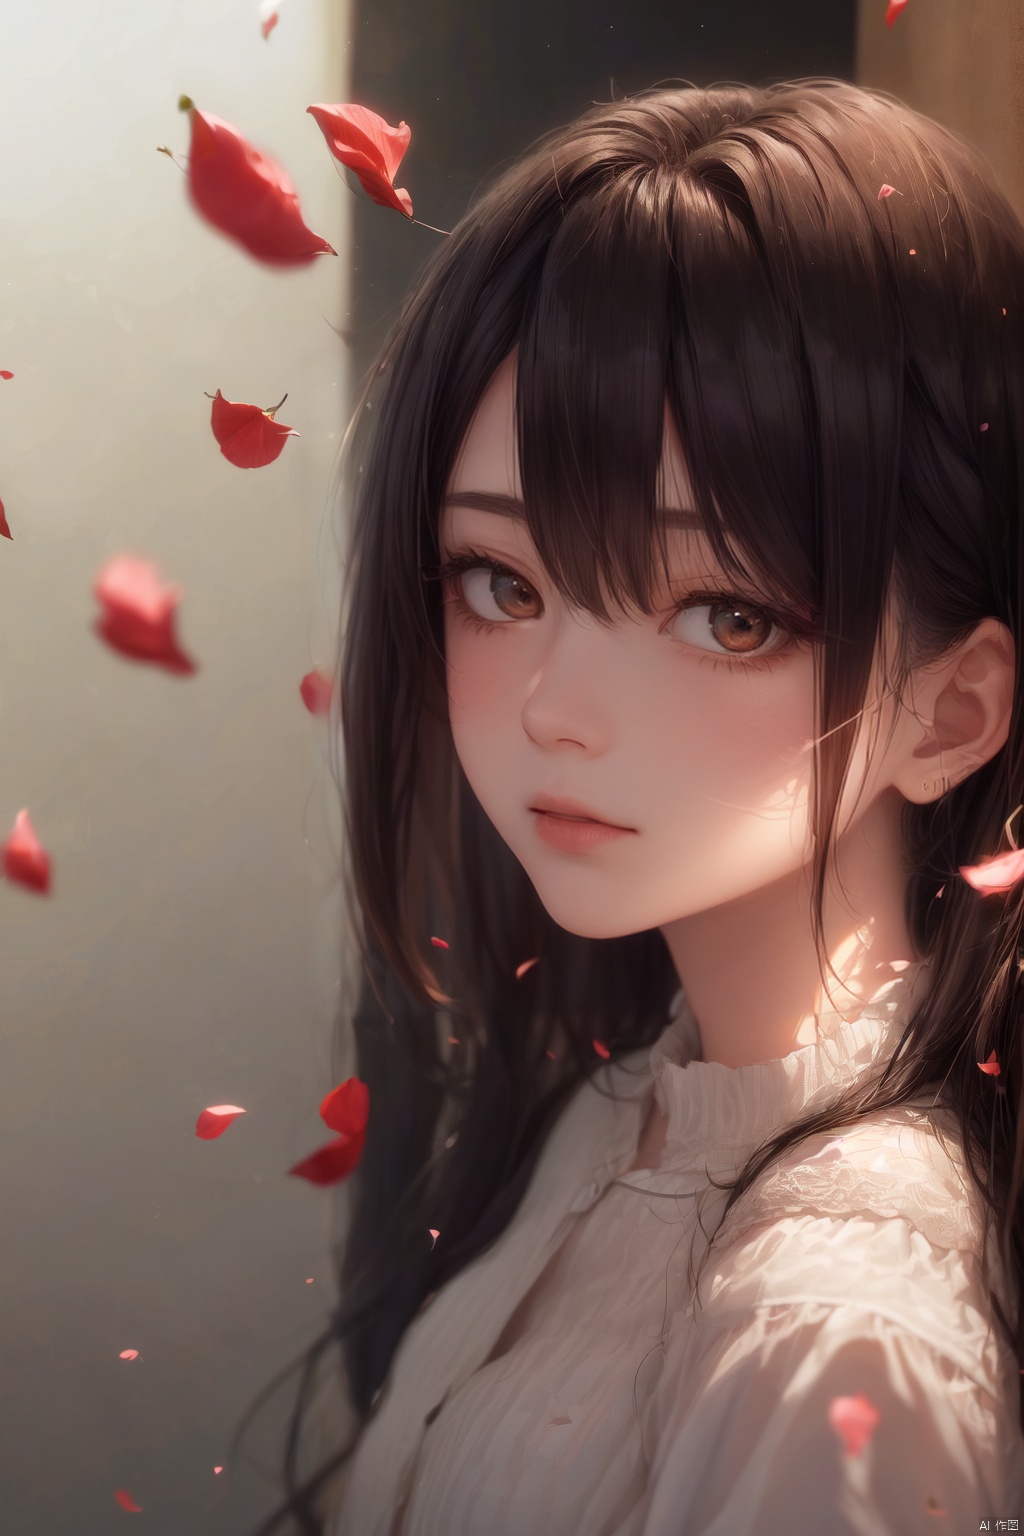 8k resolution,Masterpiece quality,High detail
Fantasy theme,1 girl in focus,
(Strong backlighting, overexposure:1.2)
(Extreme close-up on girl's eye:1.3), capturing a world within
Visual representation of endless repetition and reflection,
(Illusion of continuous visual recursion:1.6),
fluttering rose petals surrounding, 
Skillful play of light and shadows,
Ethereal, mesmerizing effect,dreamlike ambiance with a sense of infinity.